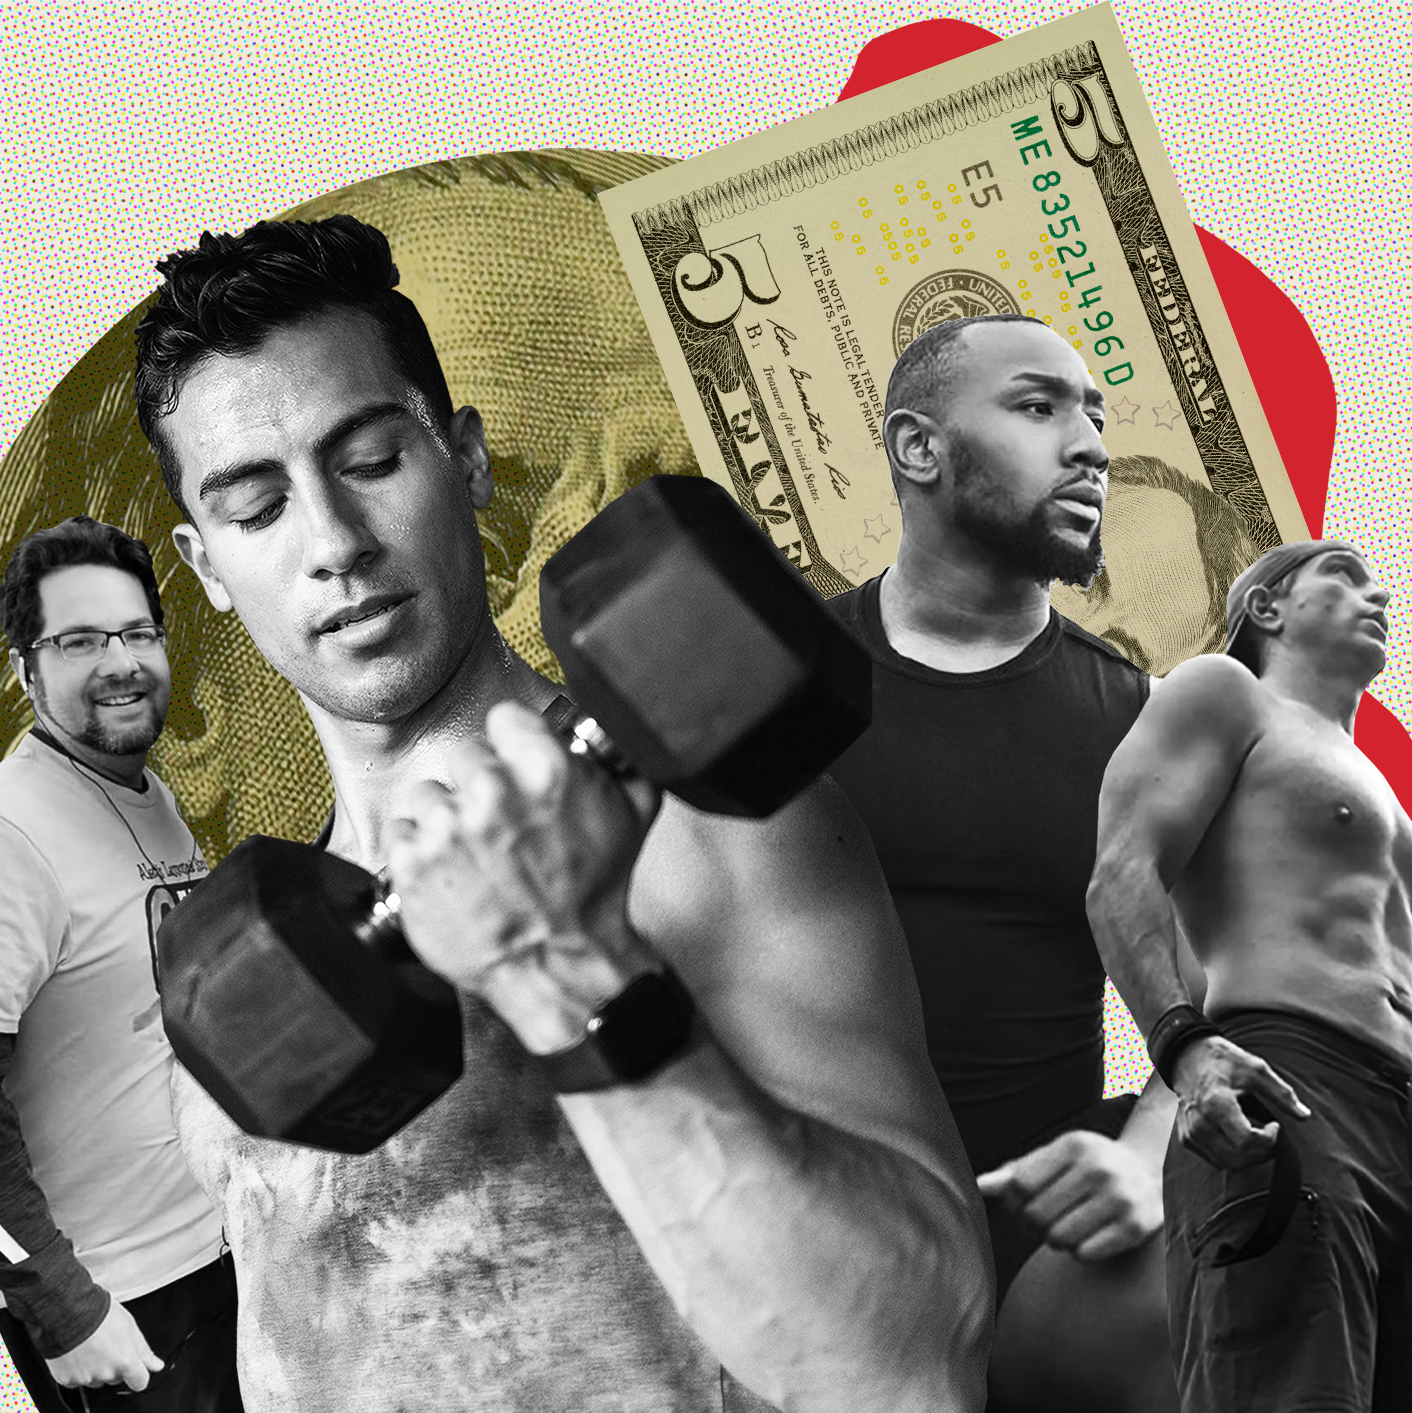 Fitness Looks Different Depending on Your Income. These Men All Make It Work.